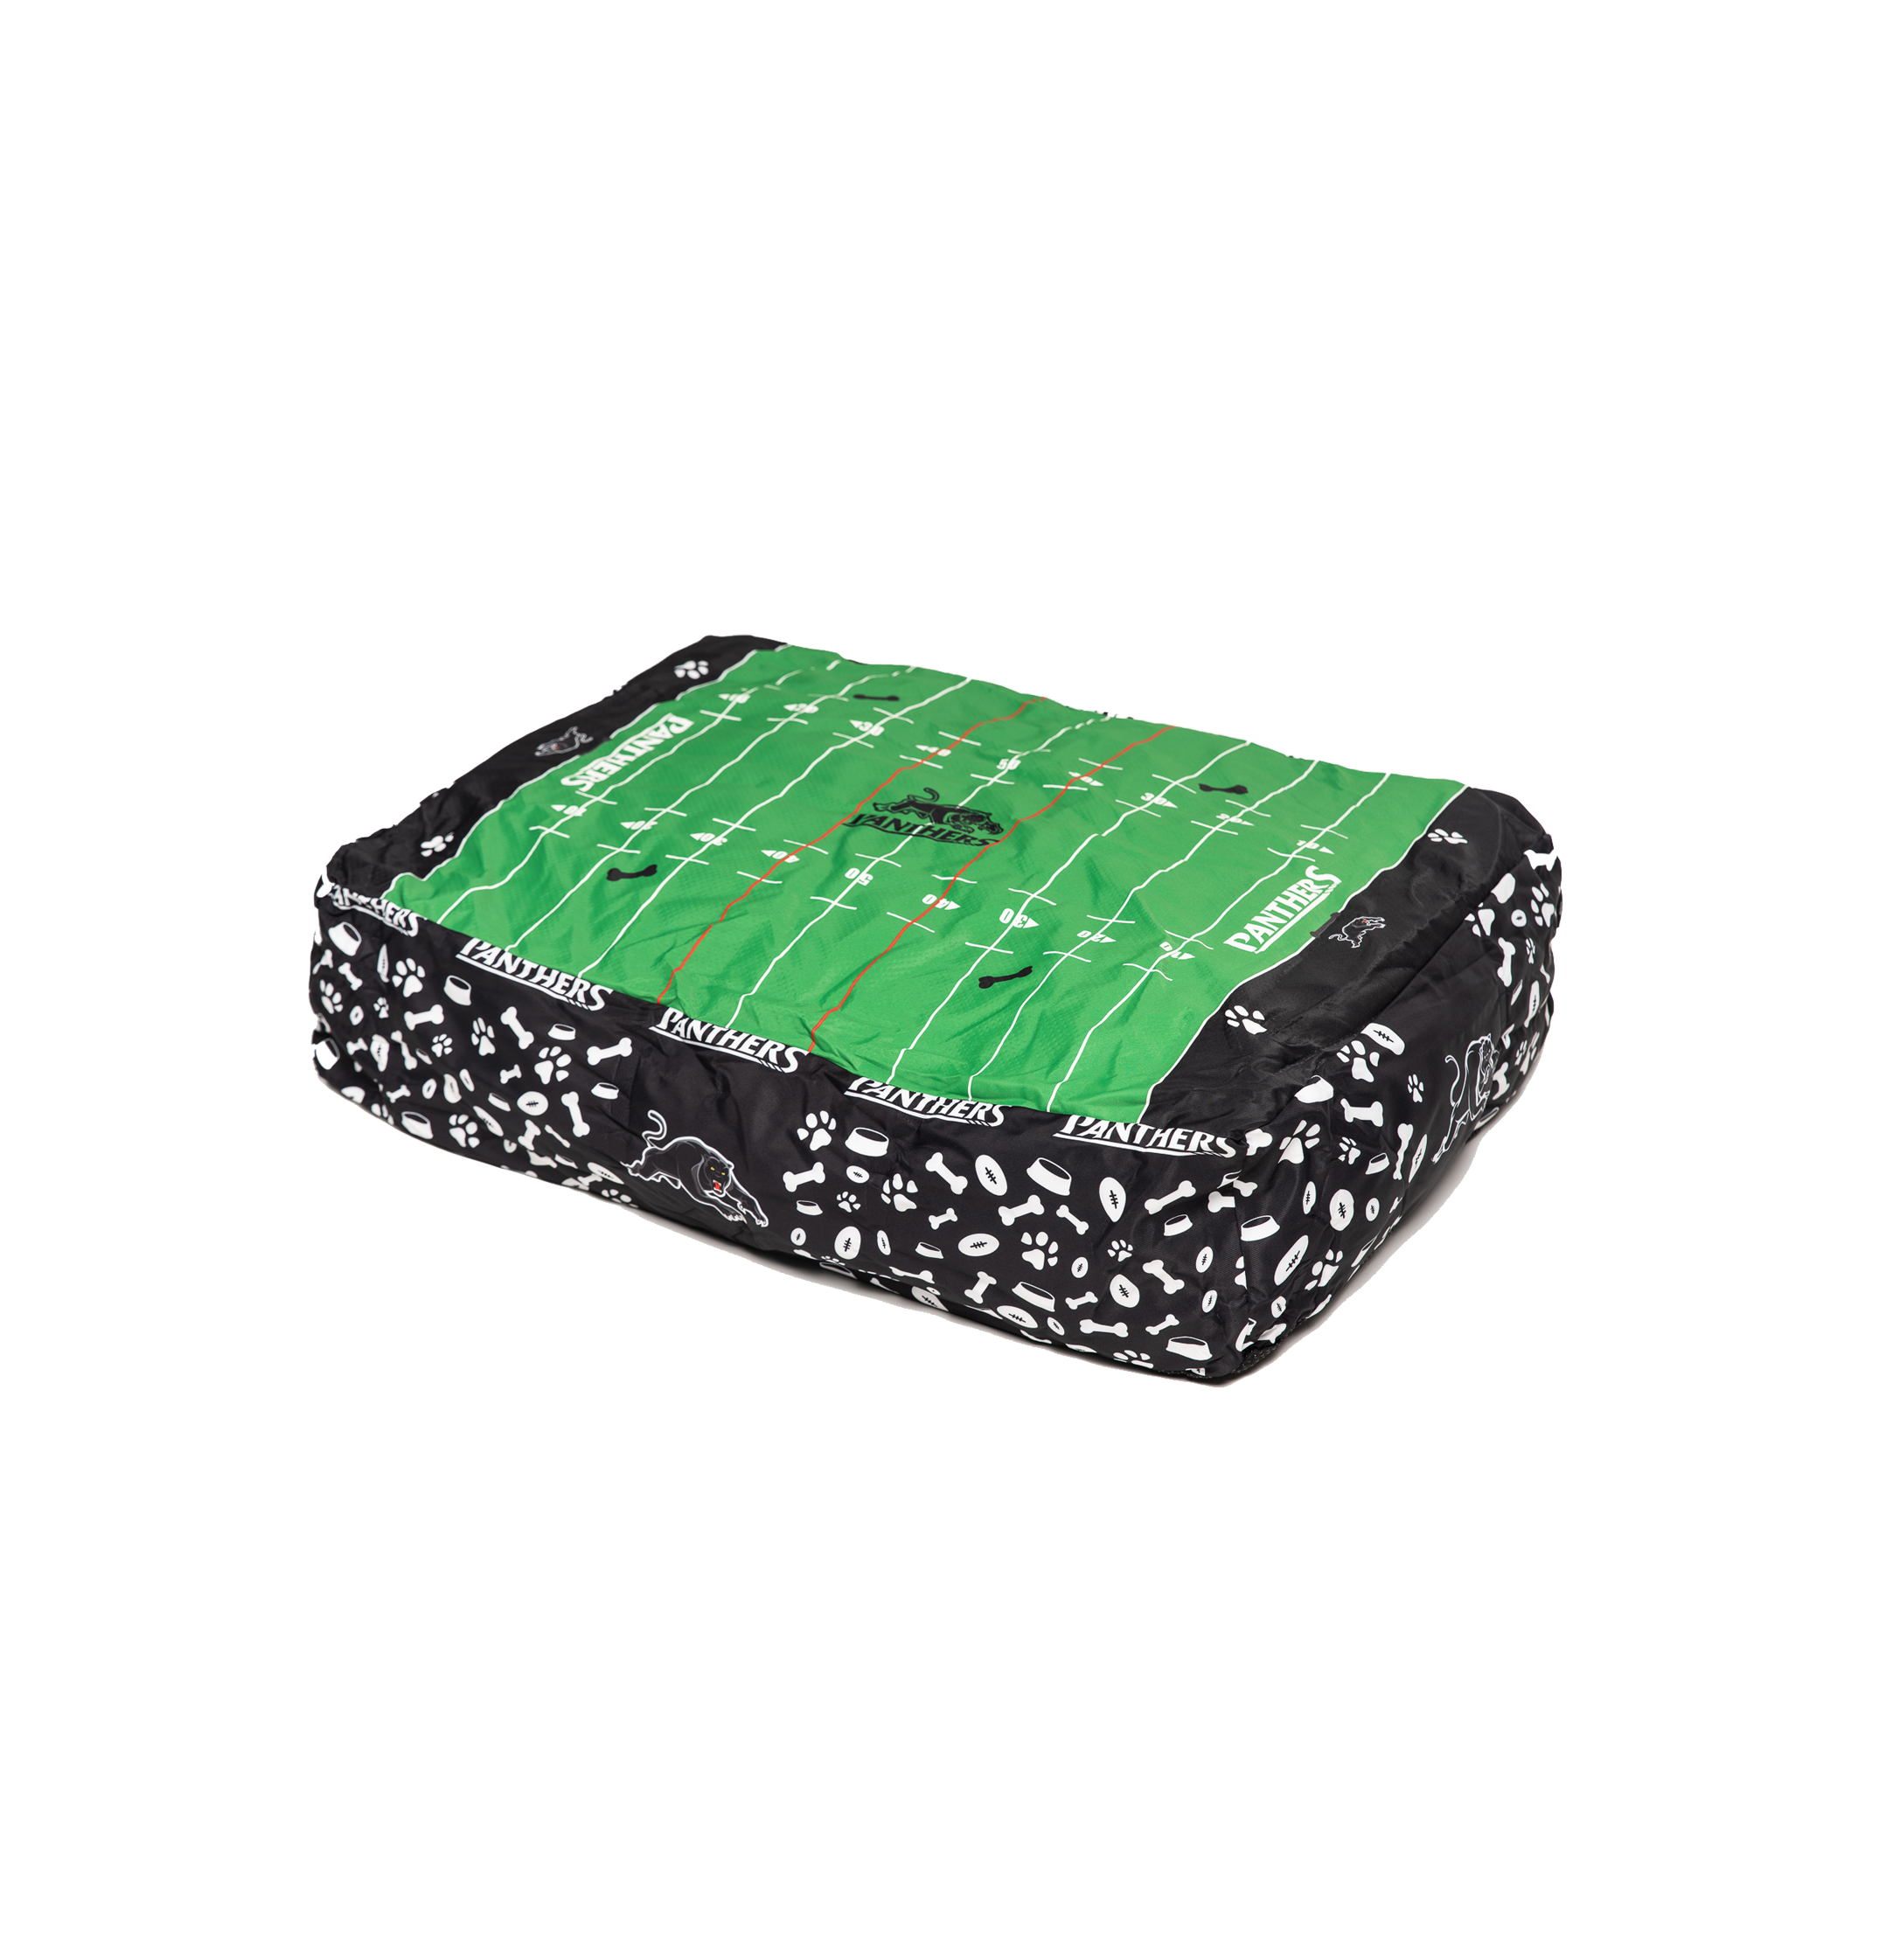 Penrith Panthers NRL Dog Bed